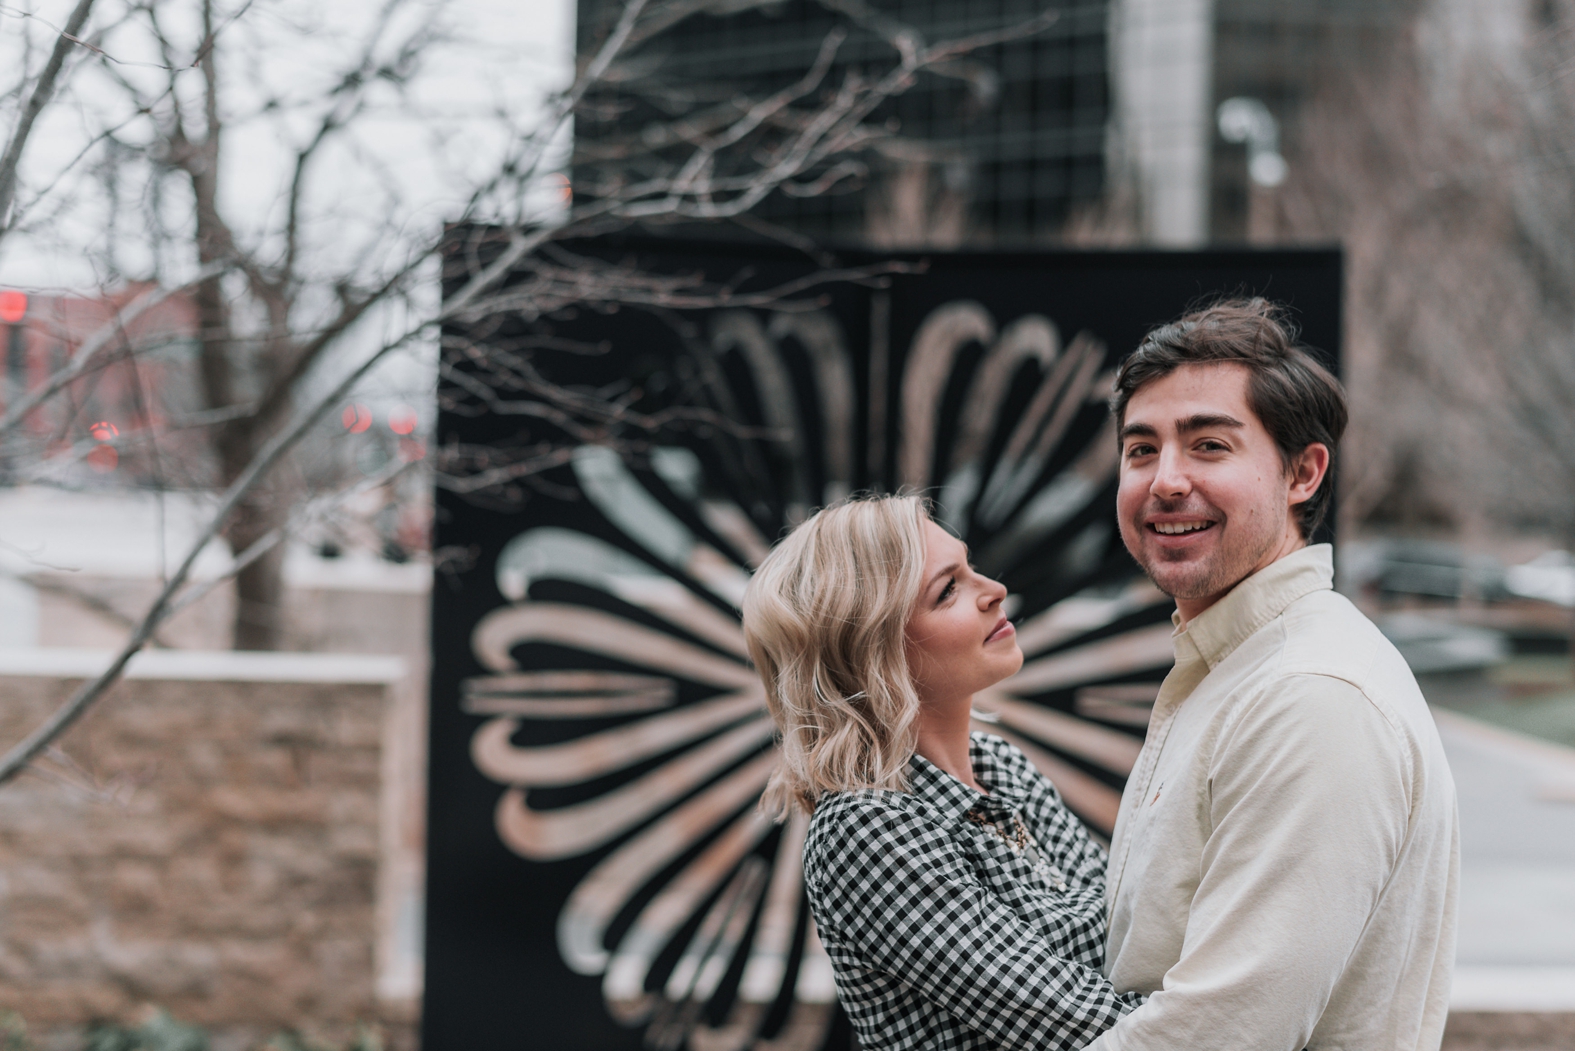 Bride to be looks adoringly at her groom as they embrace at their downtown St. Louis winter engagement photo session.